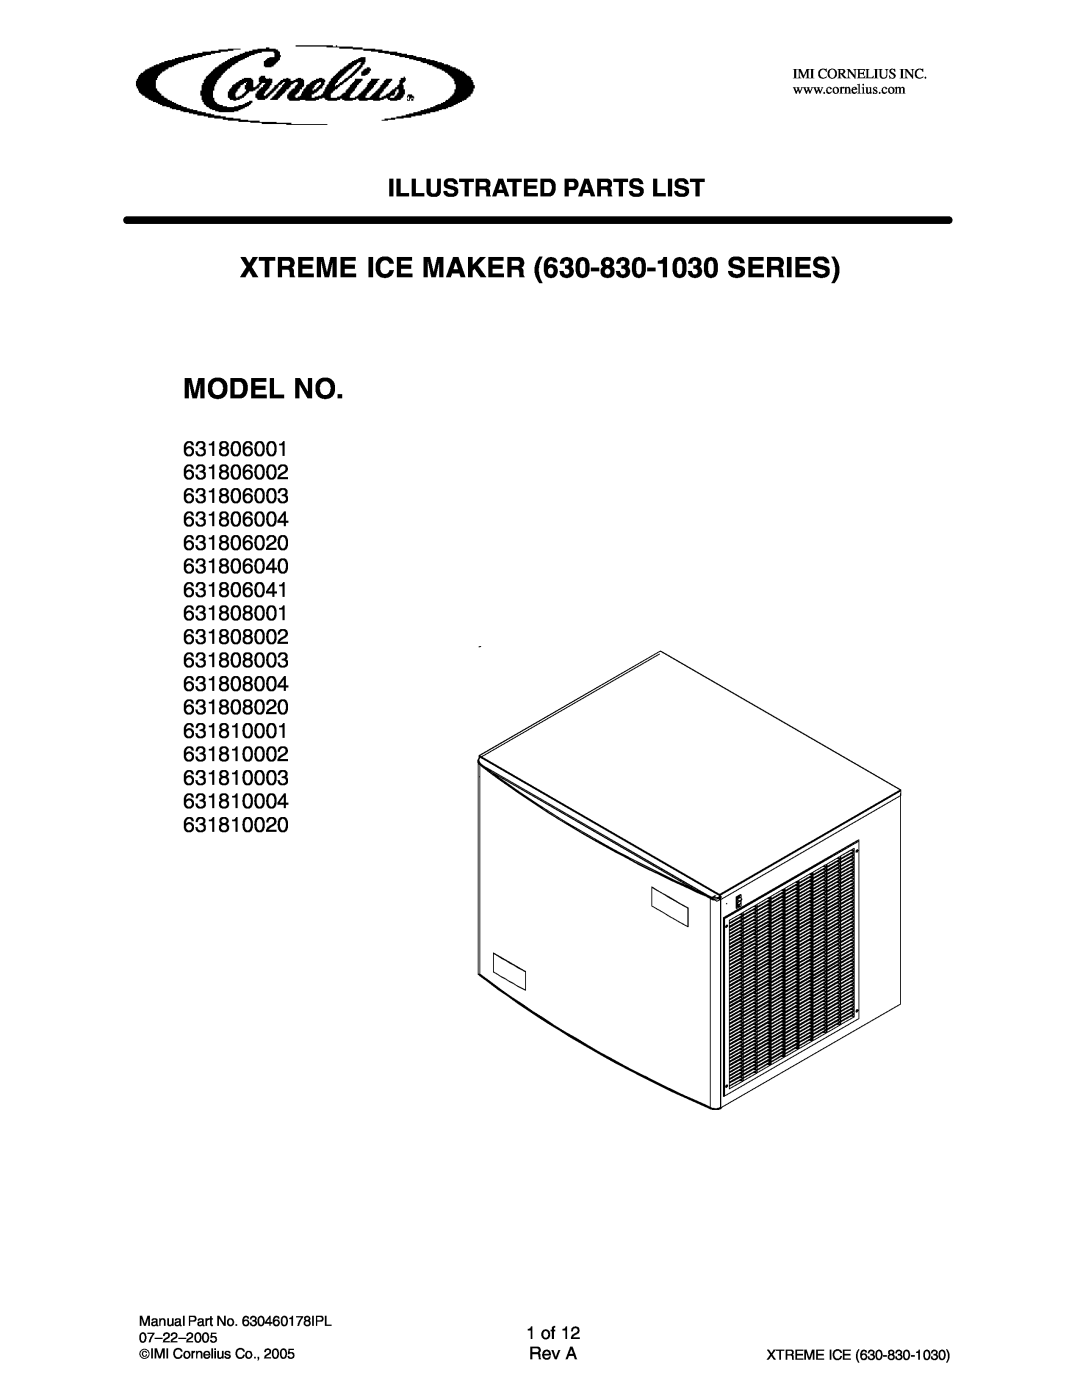 Cornelius 631810004, 631810003 manual XTREME ICE MAKER 630-830-1030SERIES MODEL NO, Illustrated Parts List, 1 of, Rev A 